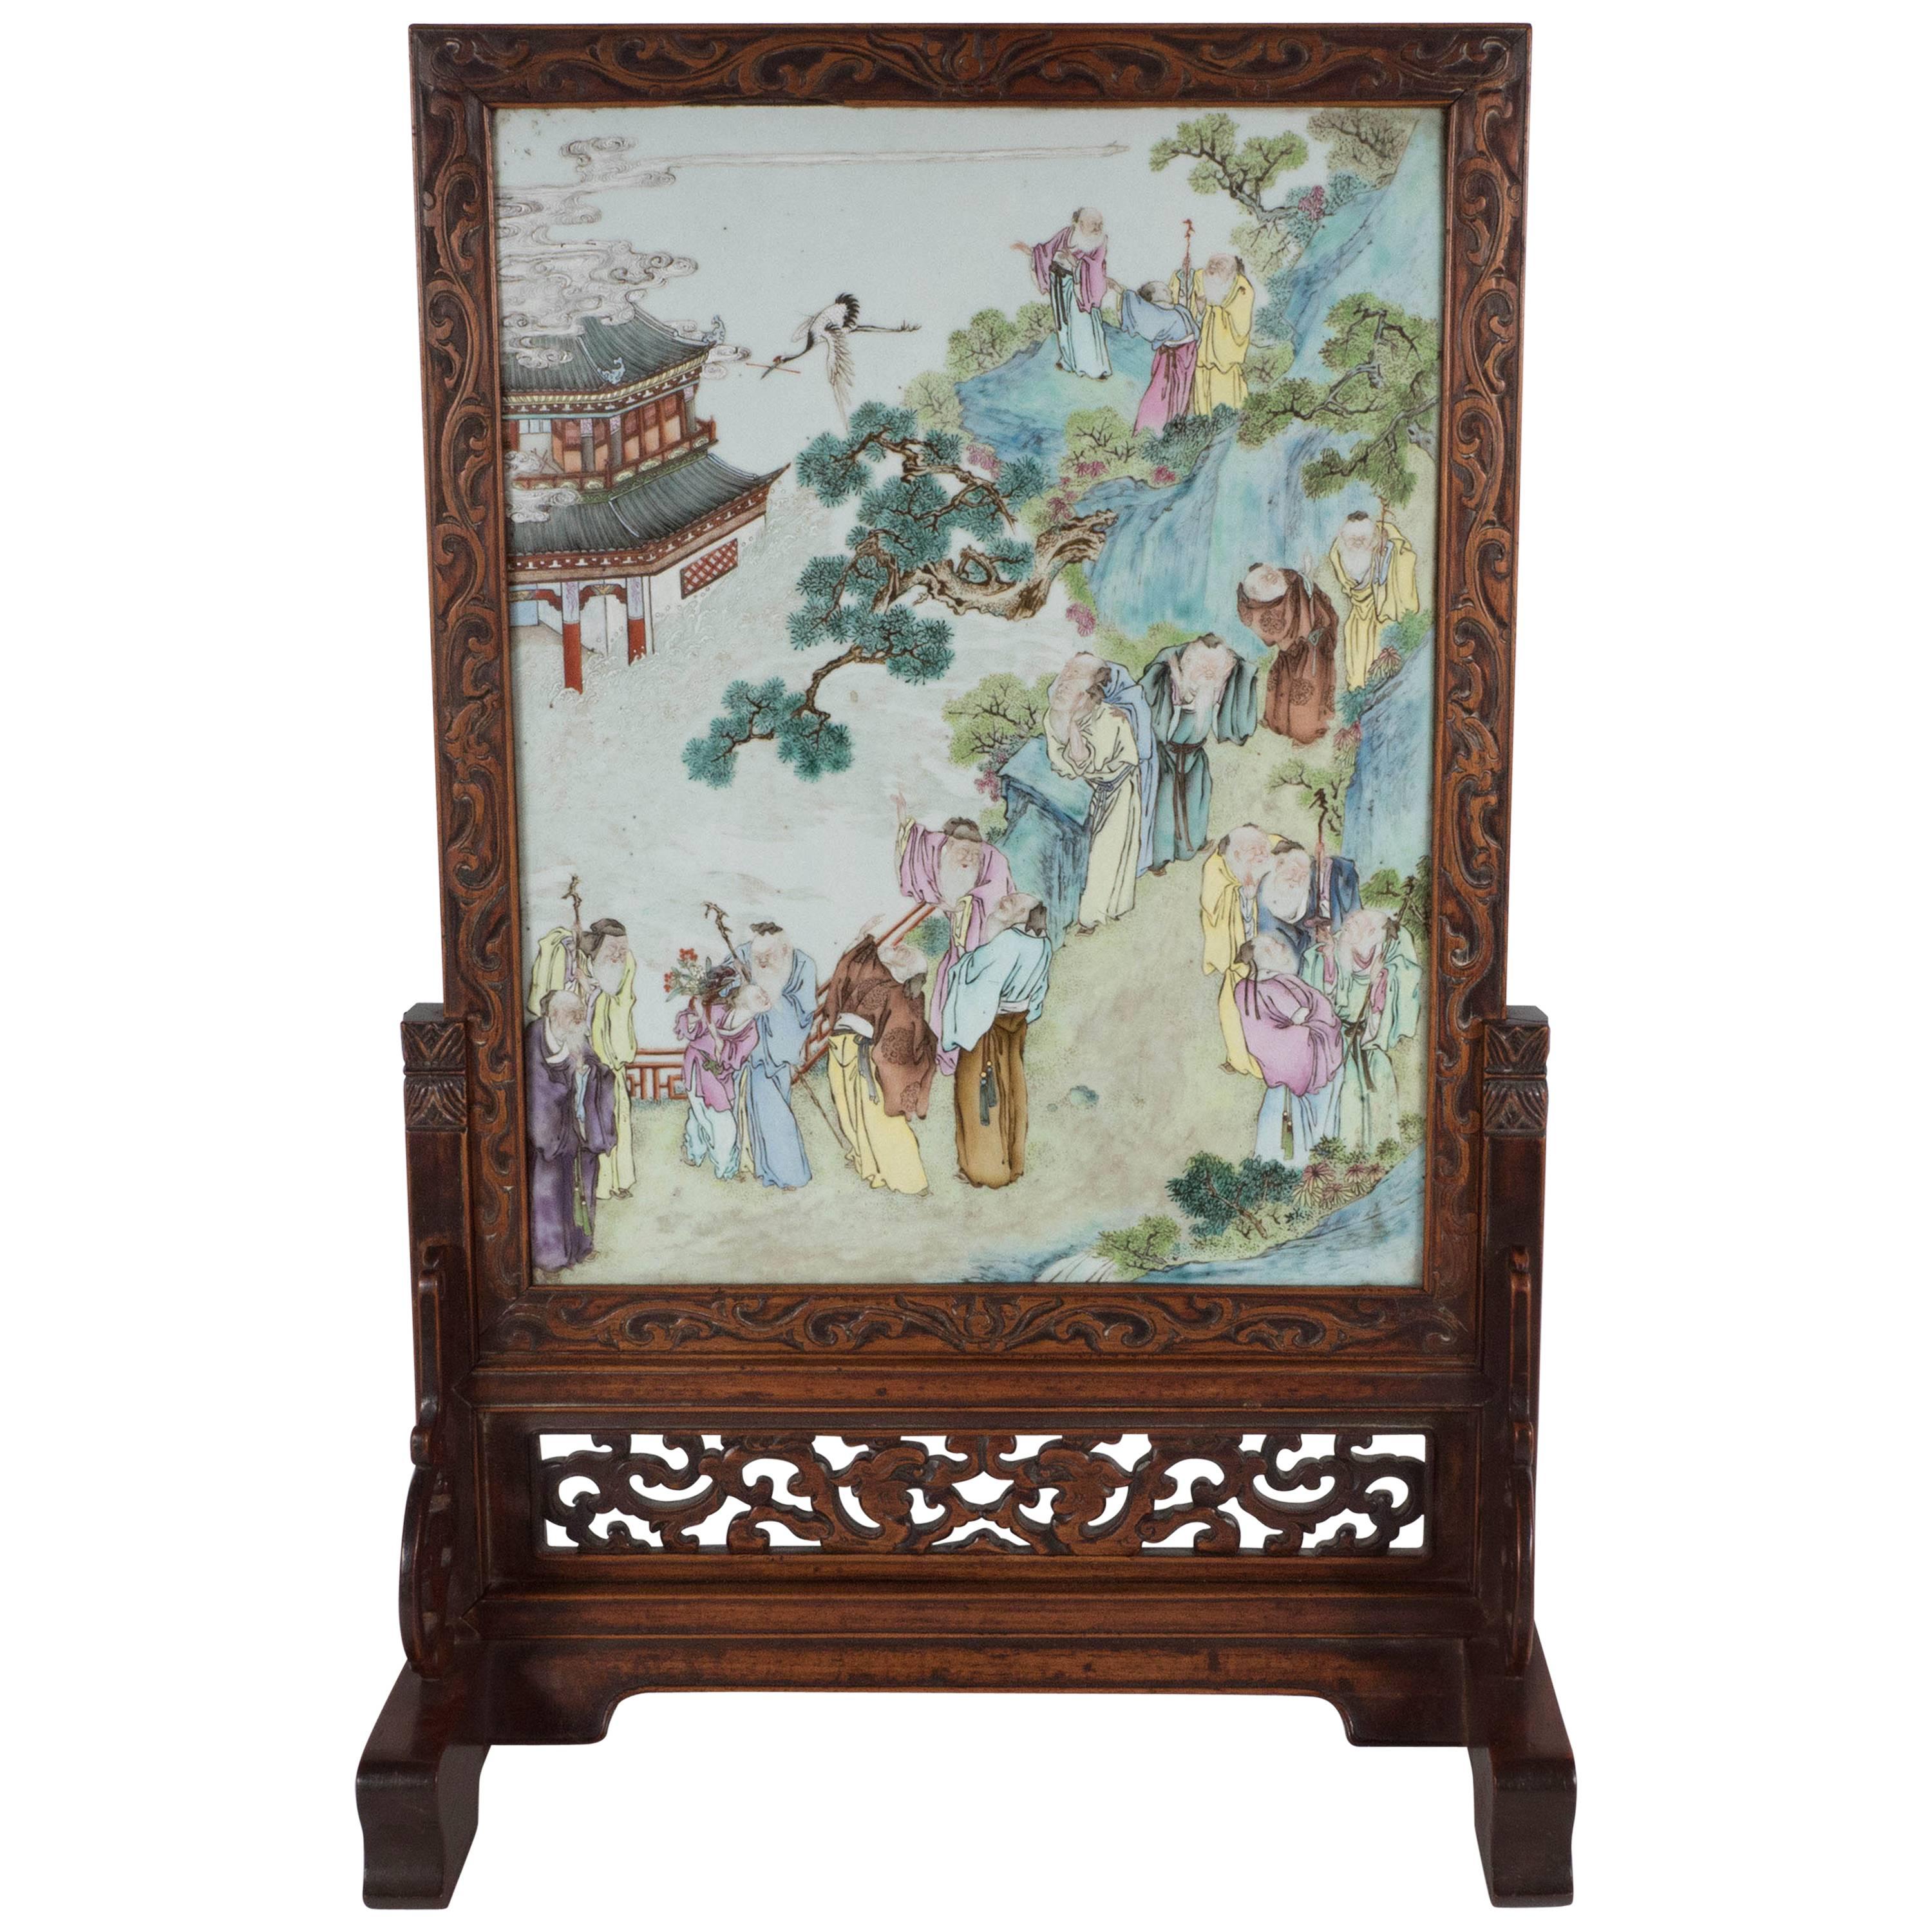 Exquisite Antique 19th Century Chinese Export and Rosewood Table Screen